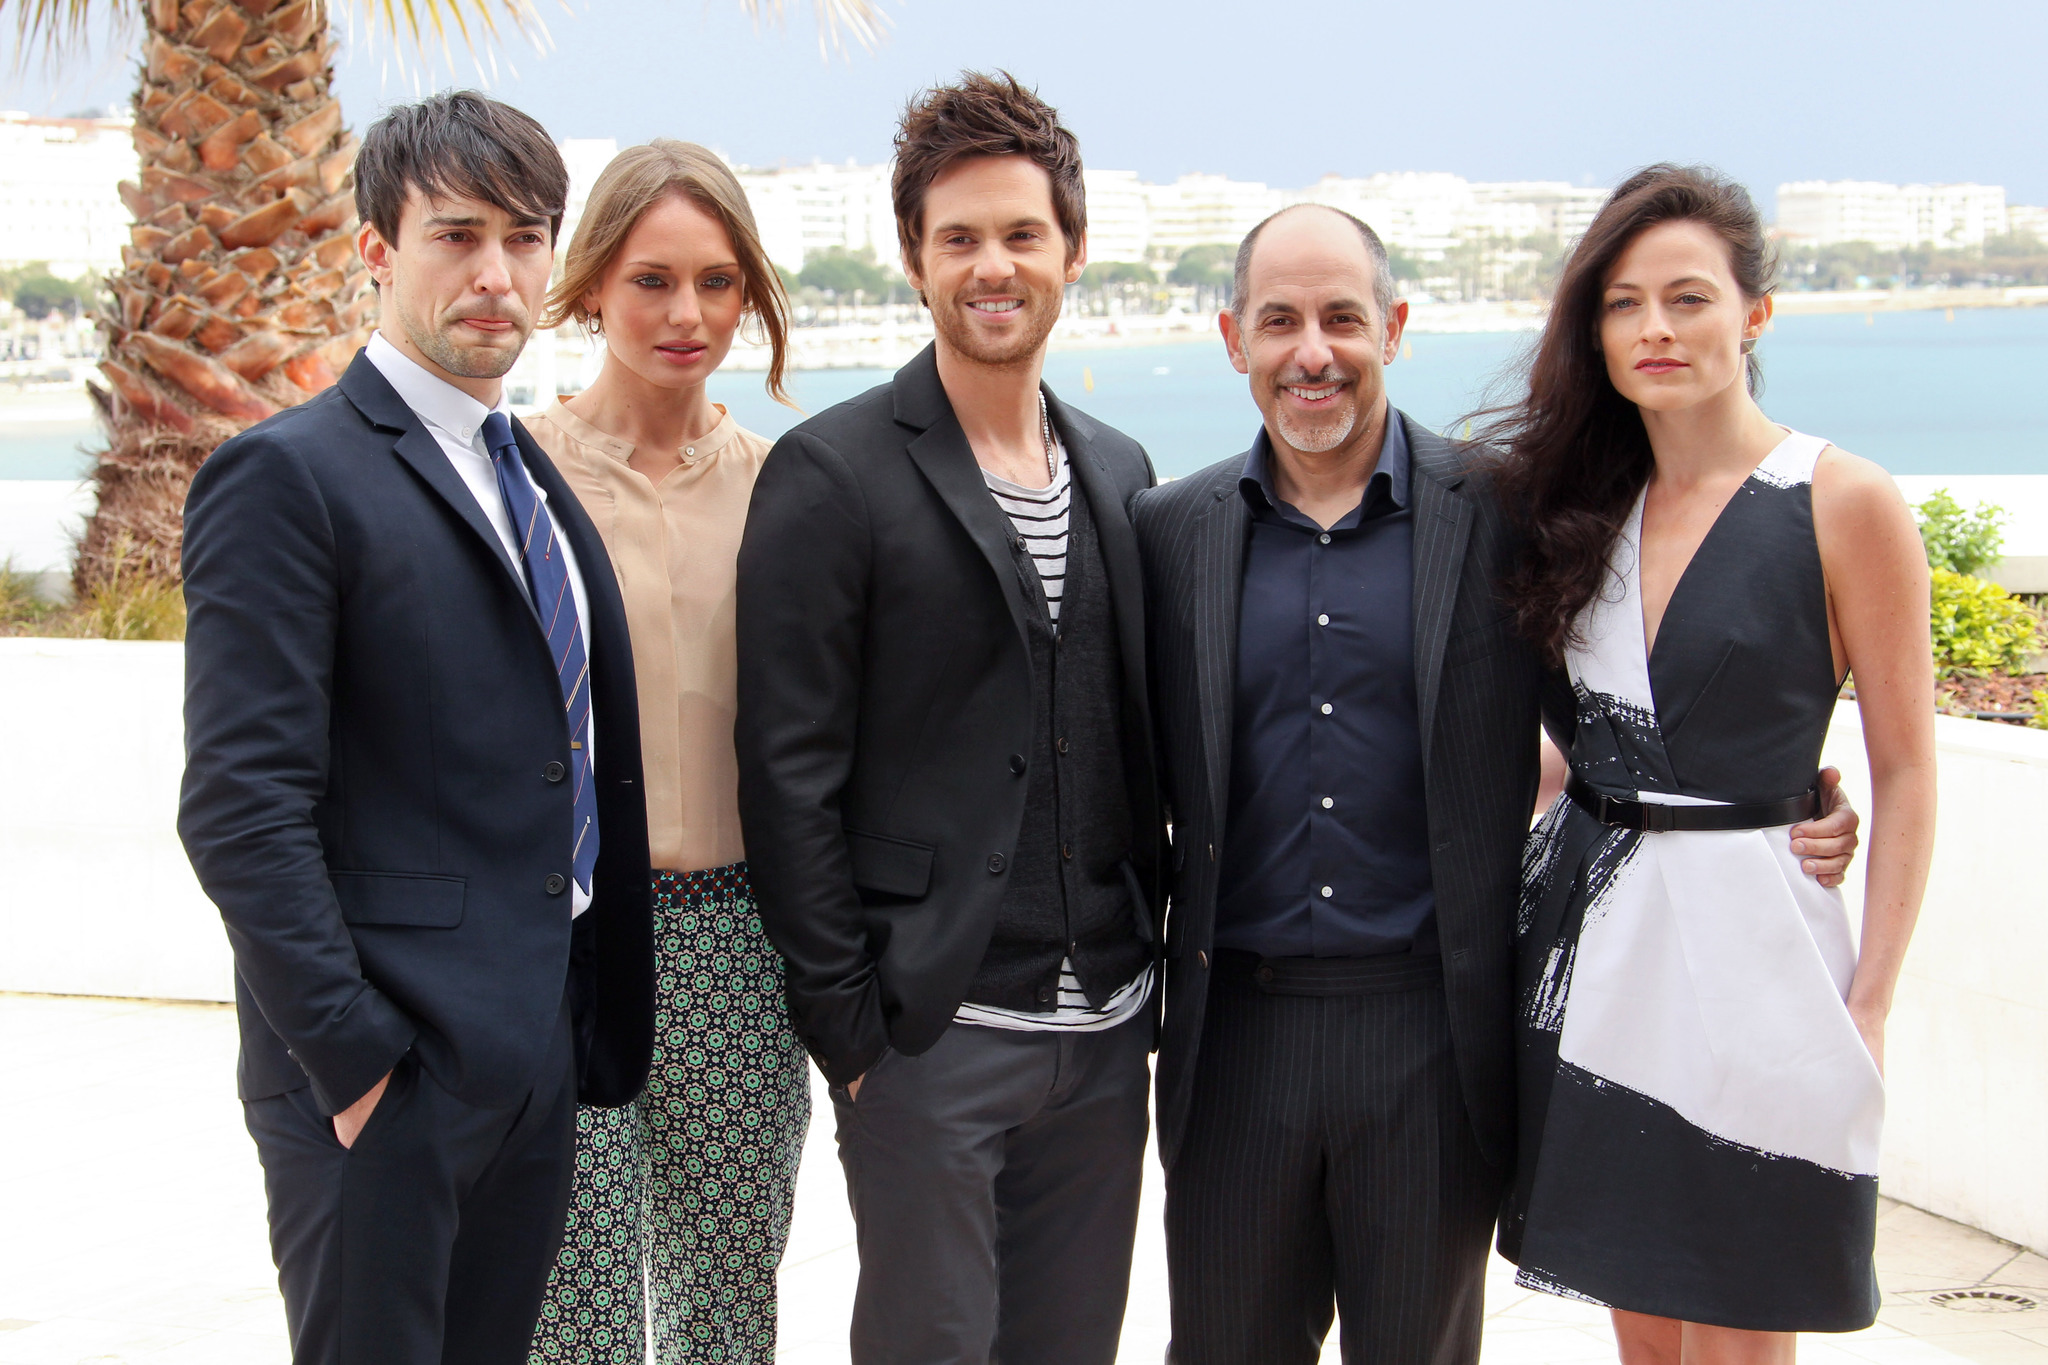 Blake Ritson, Laura Haddock, Tom Riley, writer David S. Goyer and Lara Pulver attends photocall for the TV serie 'Da Vinci's Demons' at MIP TV 2013 on April 8, 2013 in Cannes, France.